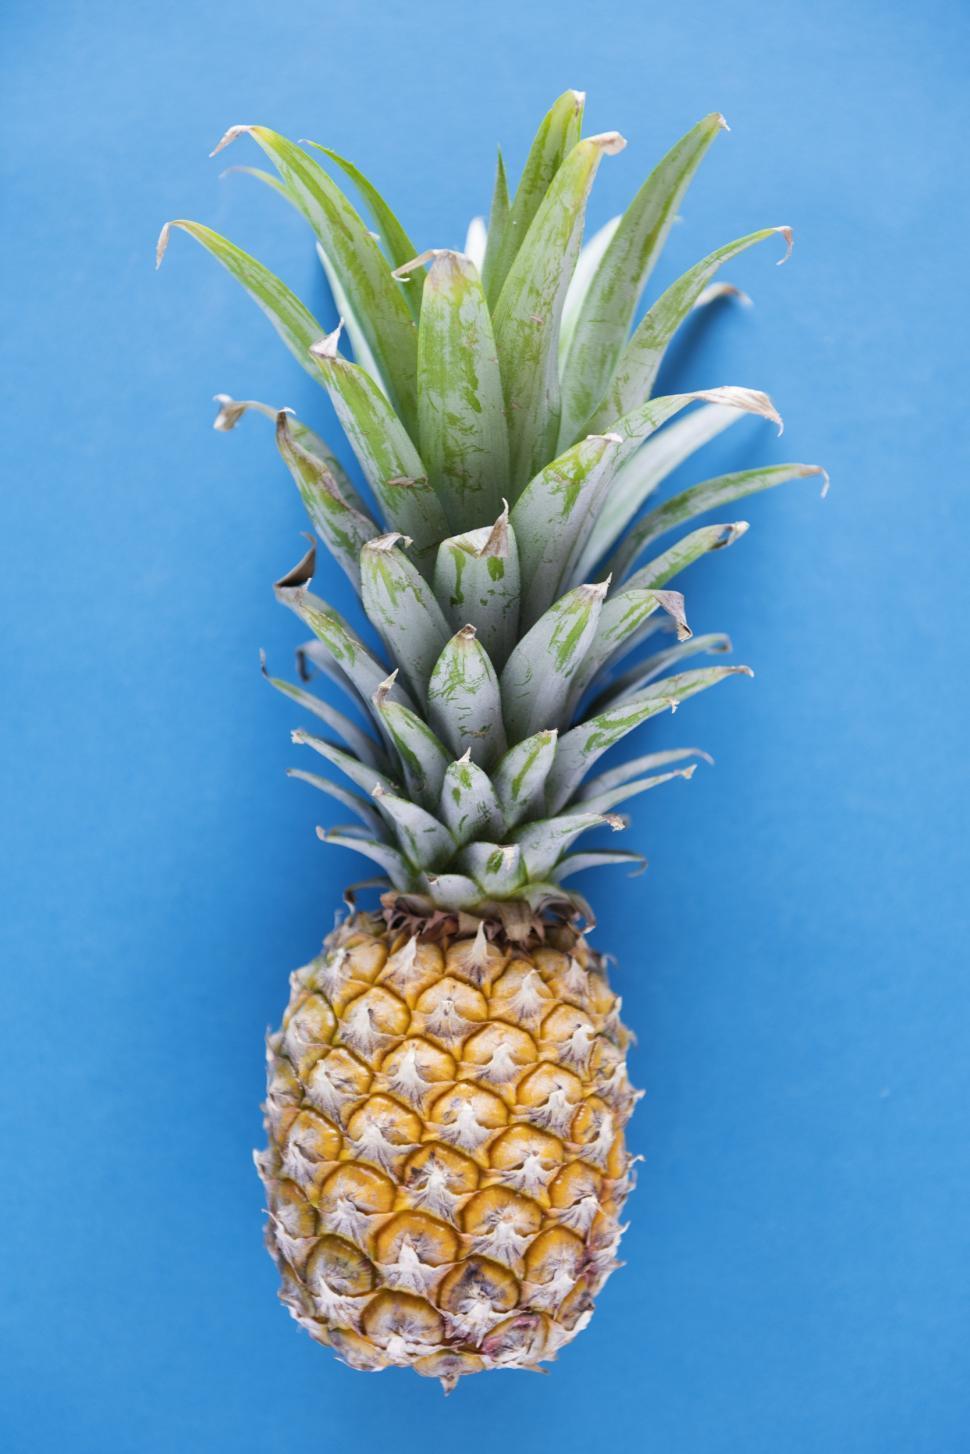 Get Free of A pineapple on blue background